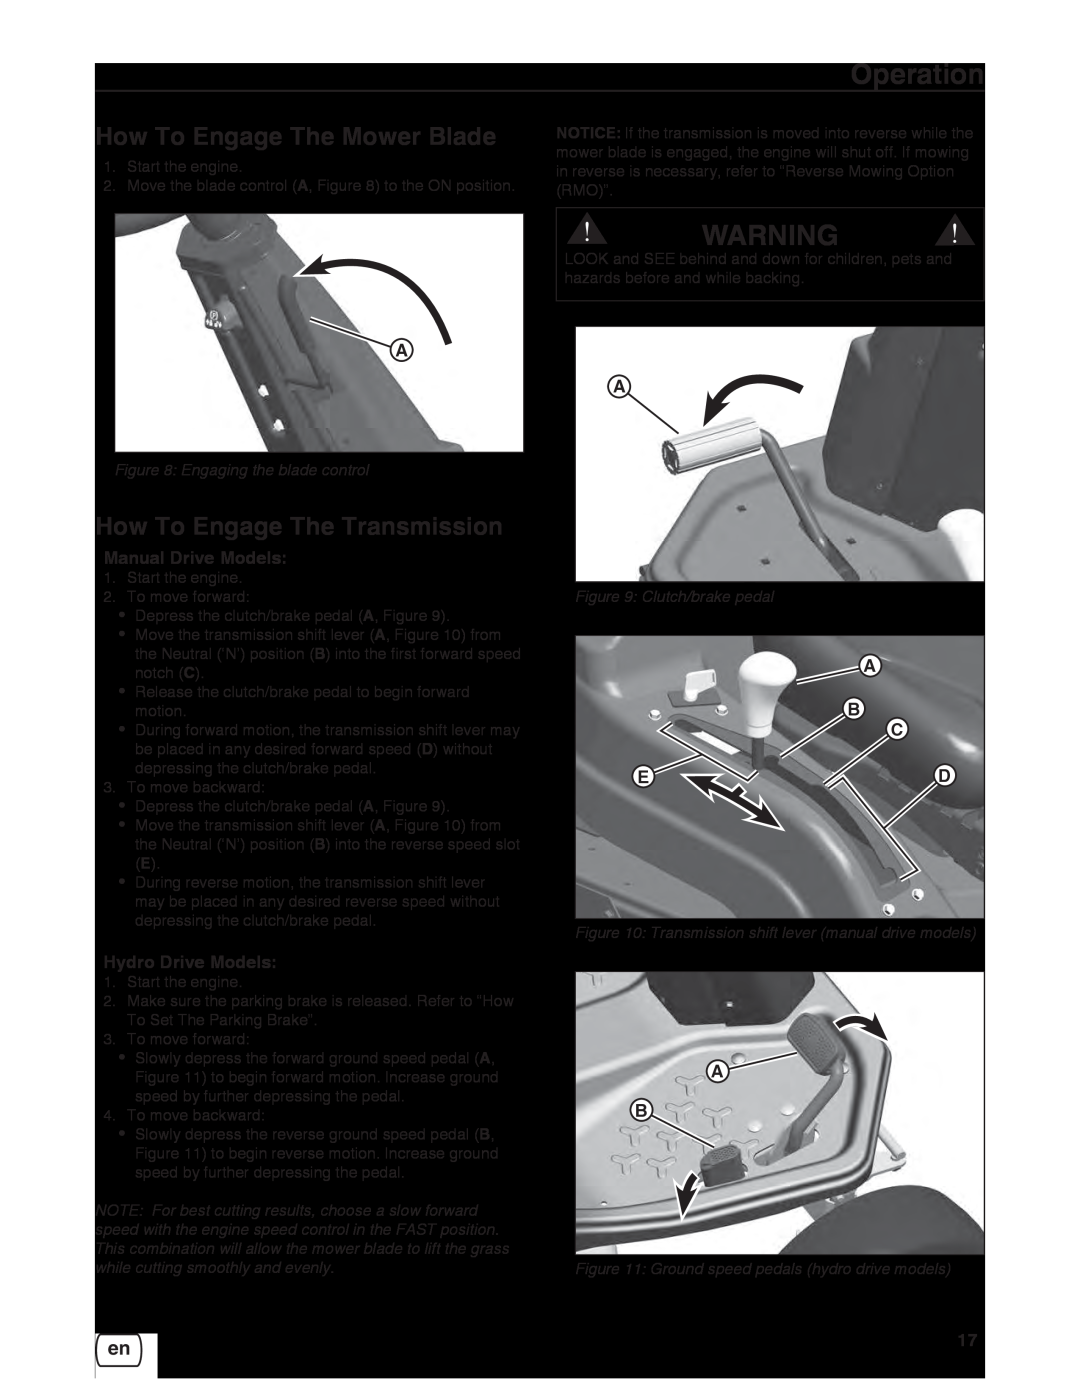 Snapper 7800918-00 manual Reproduction, forward, How To Engage The Mower Blade, How To Engage The Transmission, Operation 